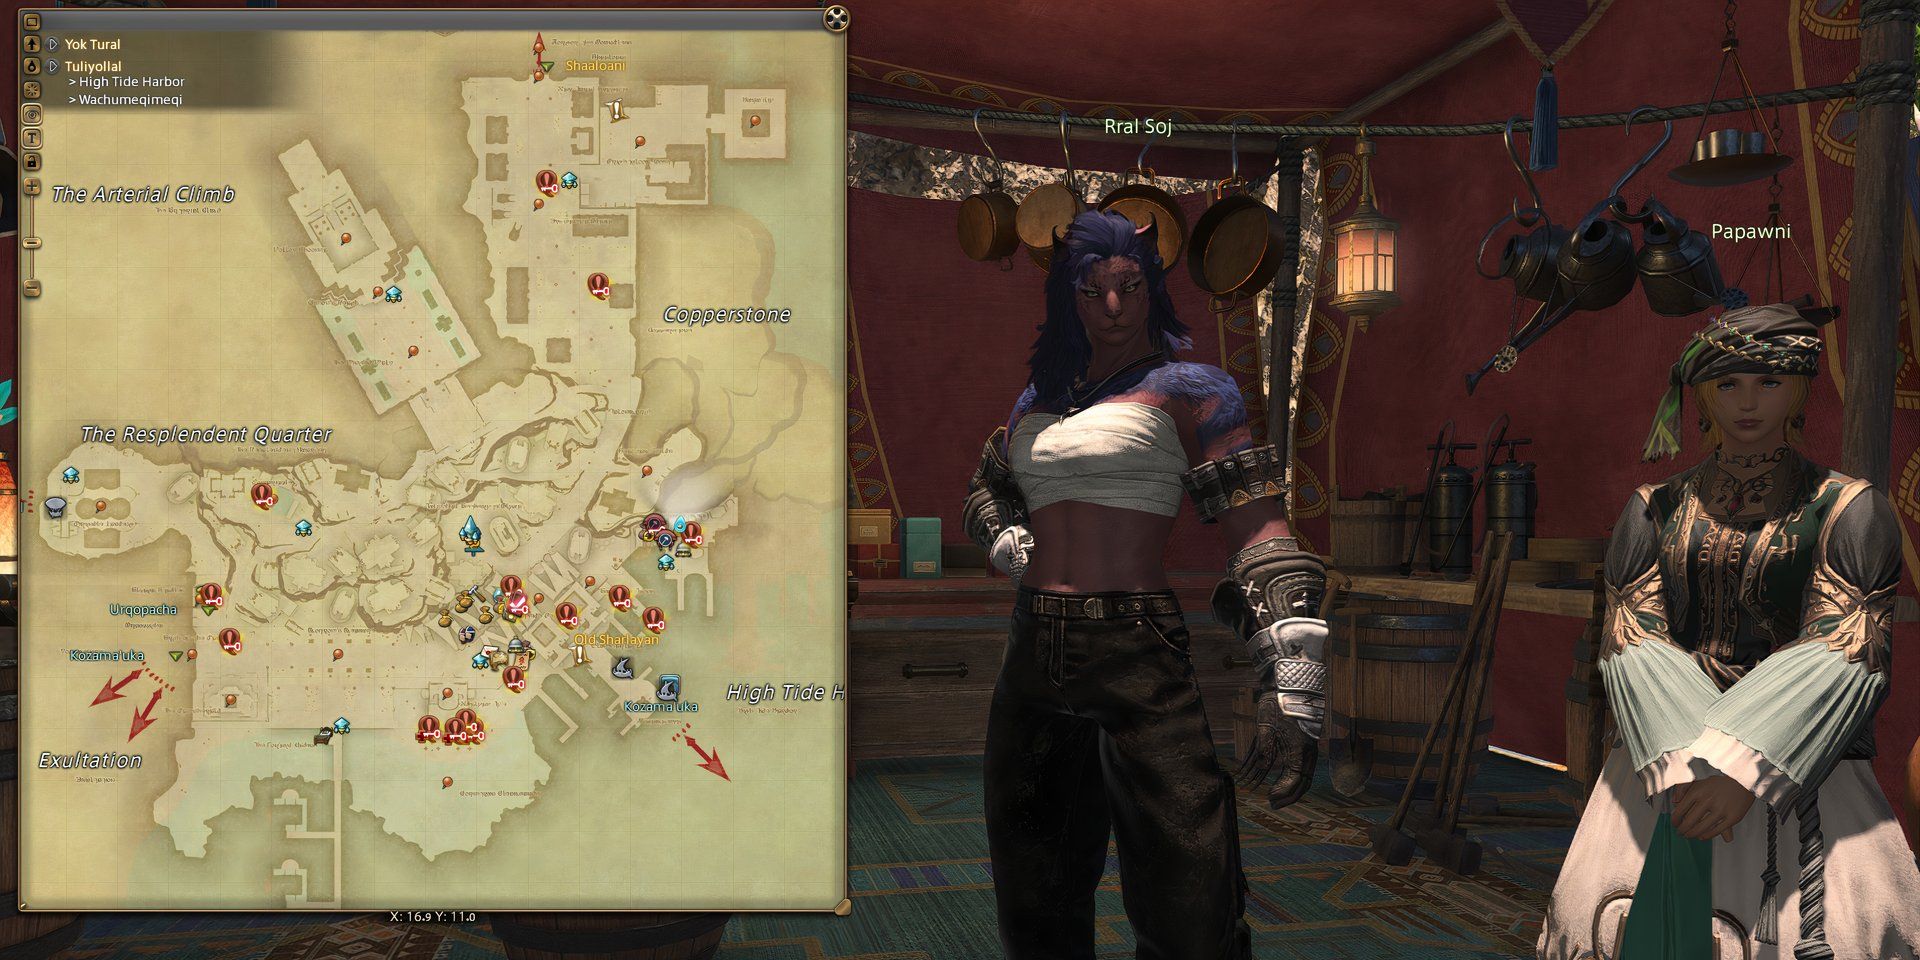 final fantasy 14 wachumeqimeqi deliveries delivery crafter role quest dawntrail xrral soj metalwares